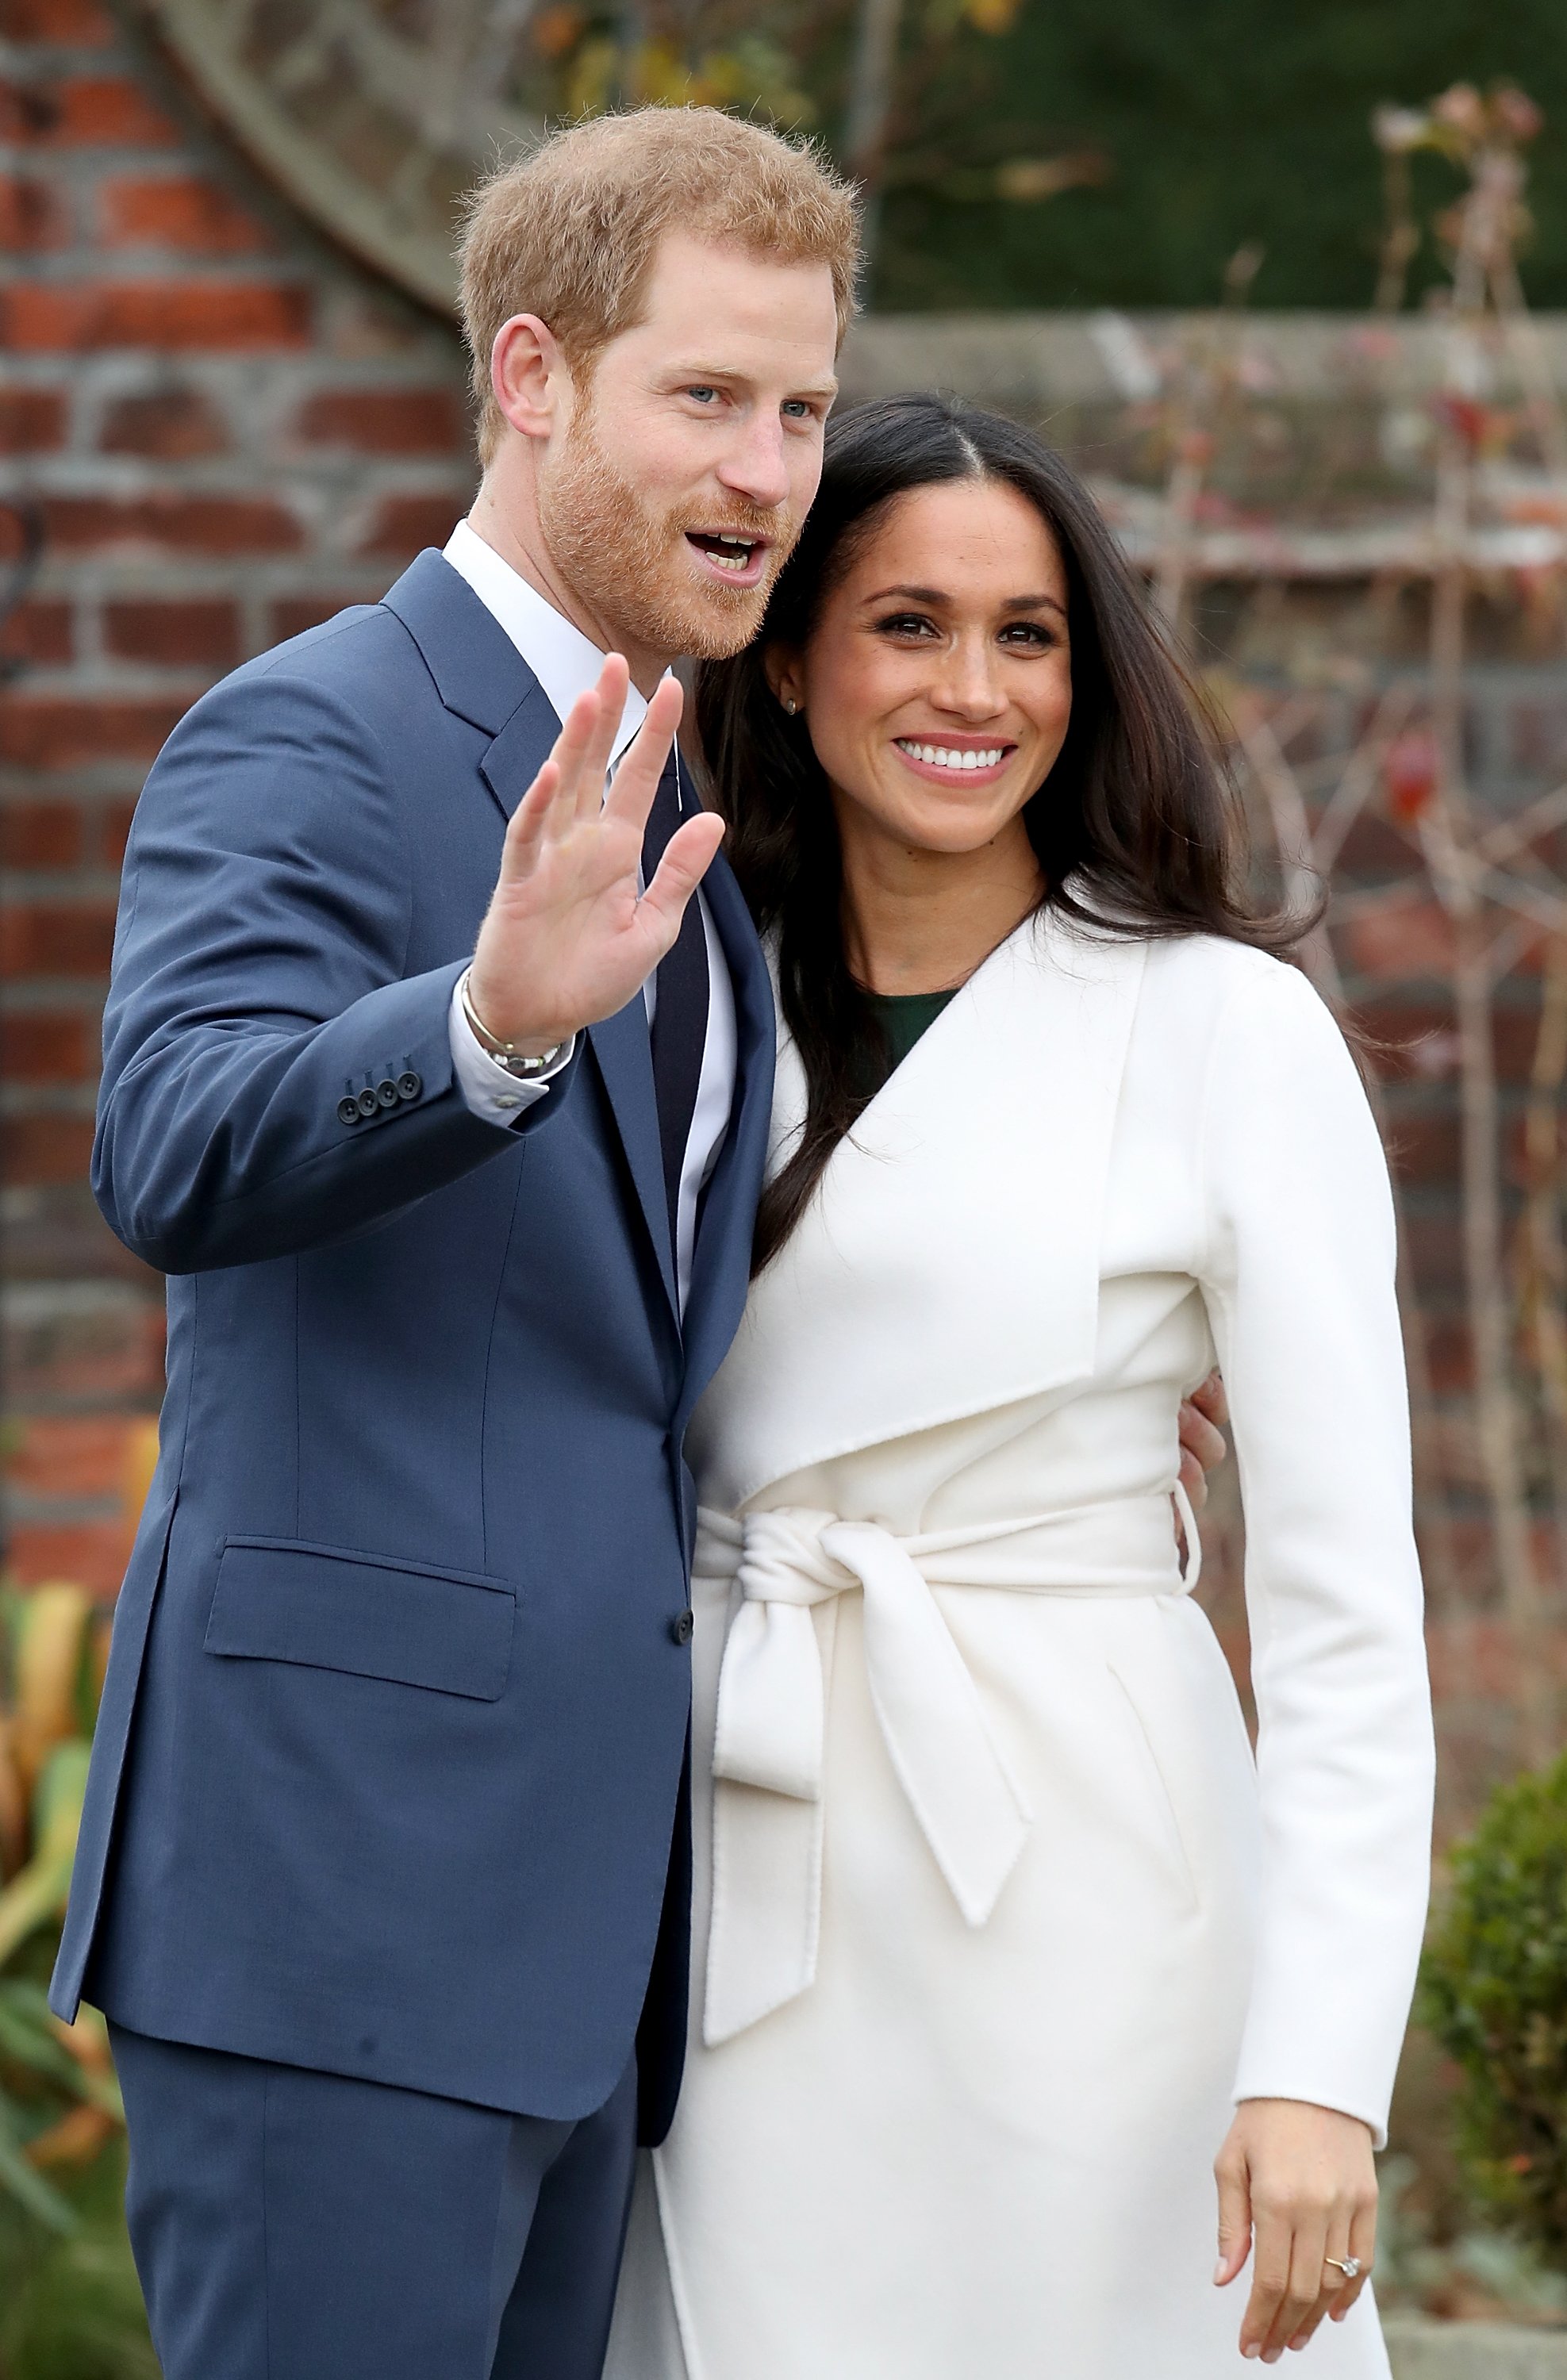 The Duke and Duchess of Sussex, Prince Harry and Meghan Markle, posing for the photographers at the Sunken Gardens at Kensington Palace following their engagement | Photo: Getty Images